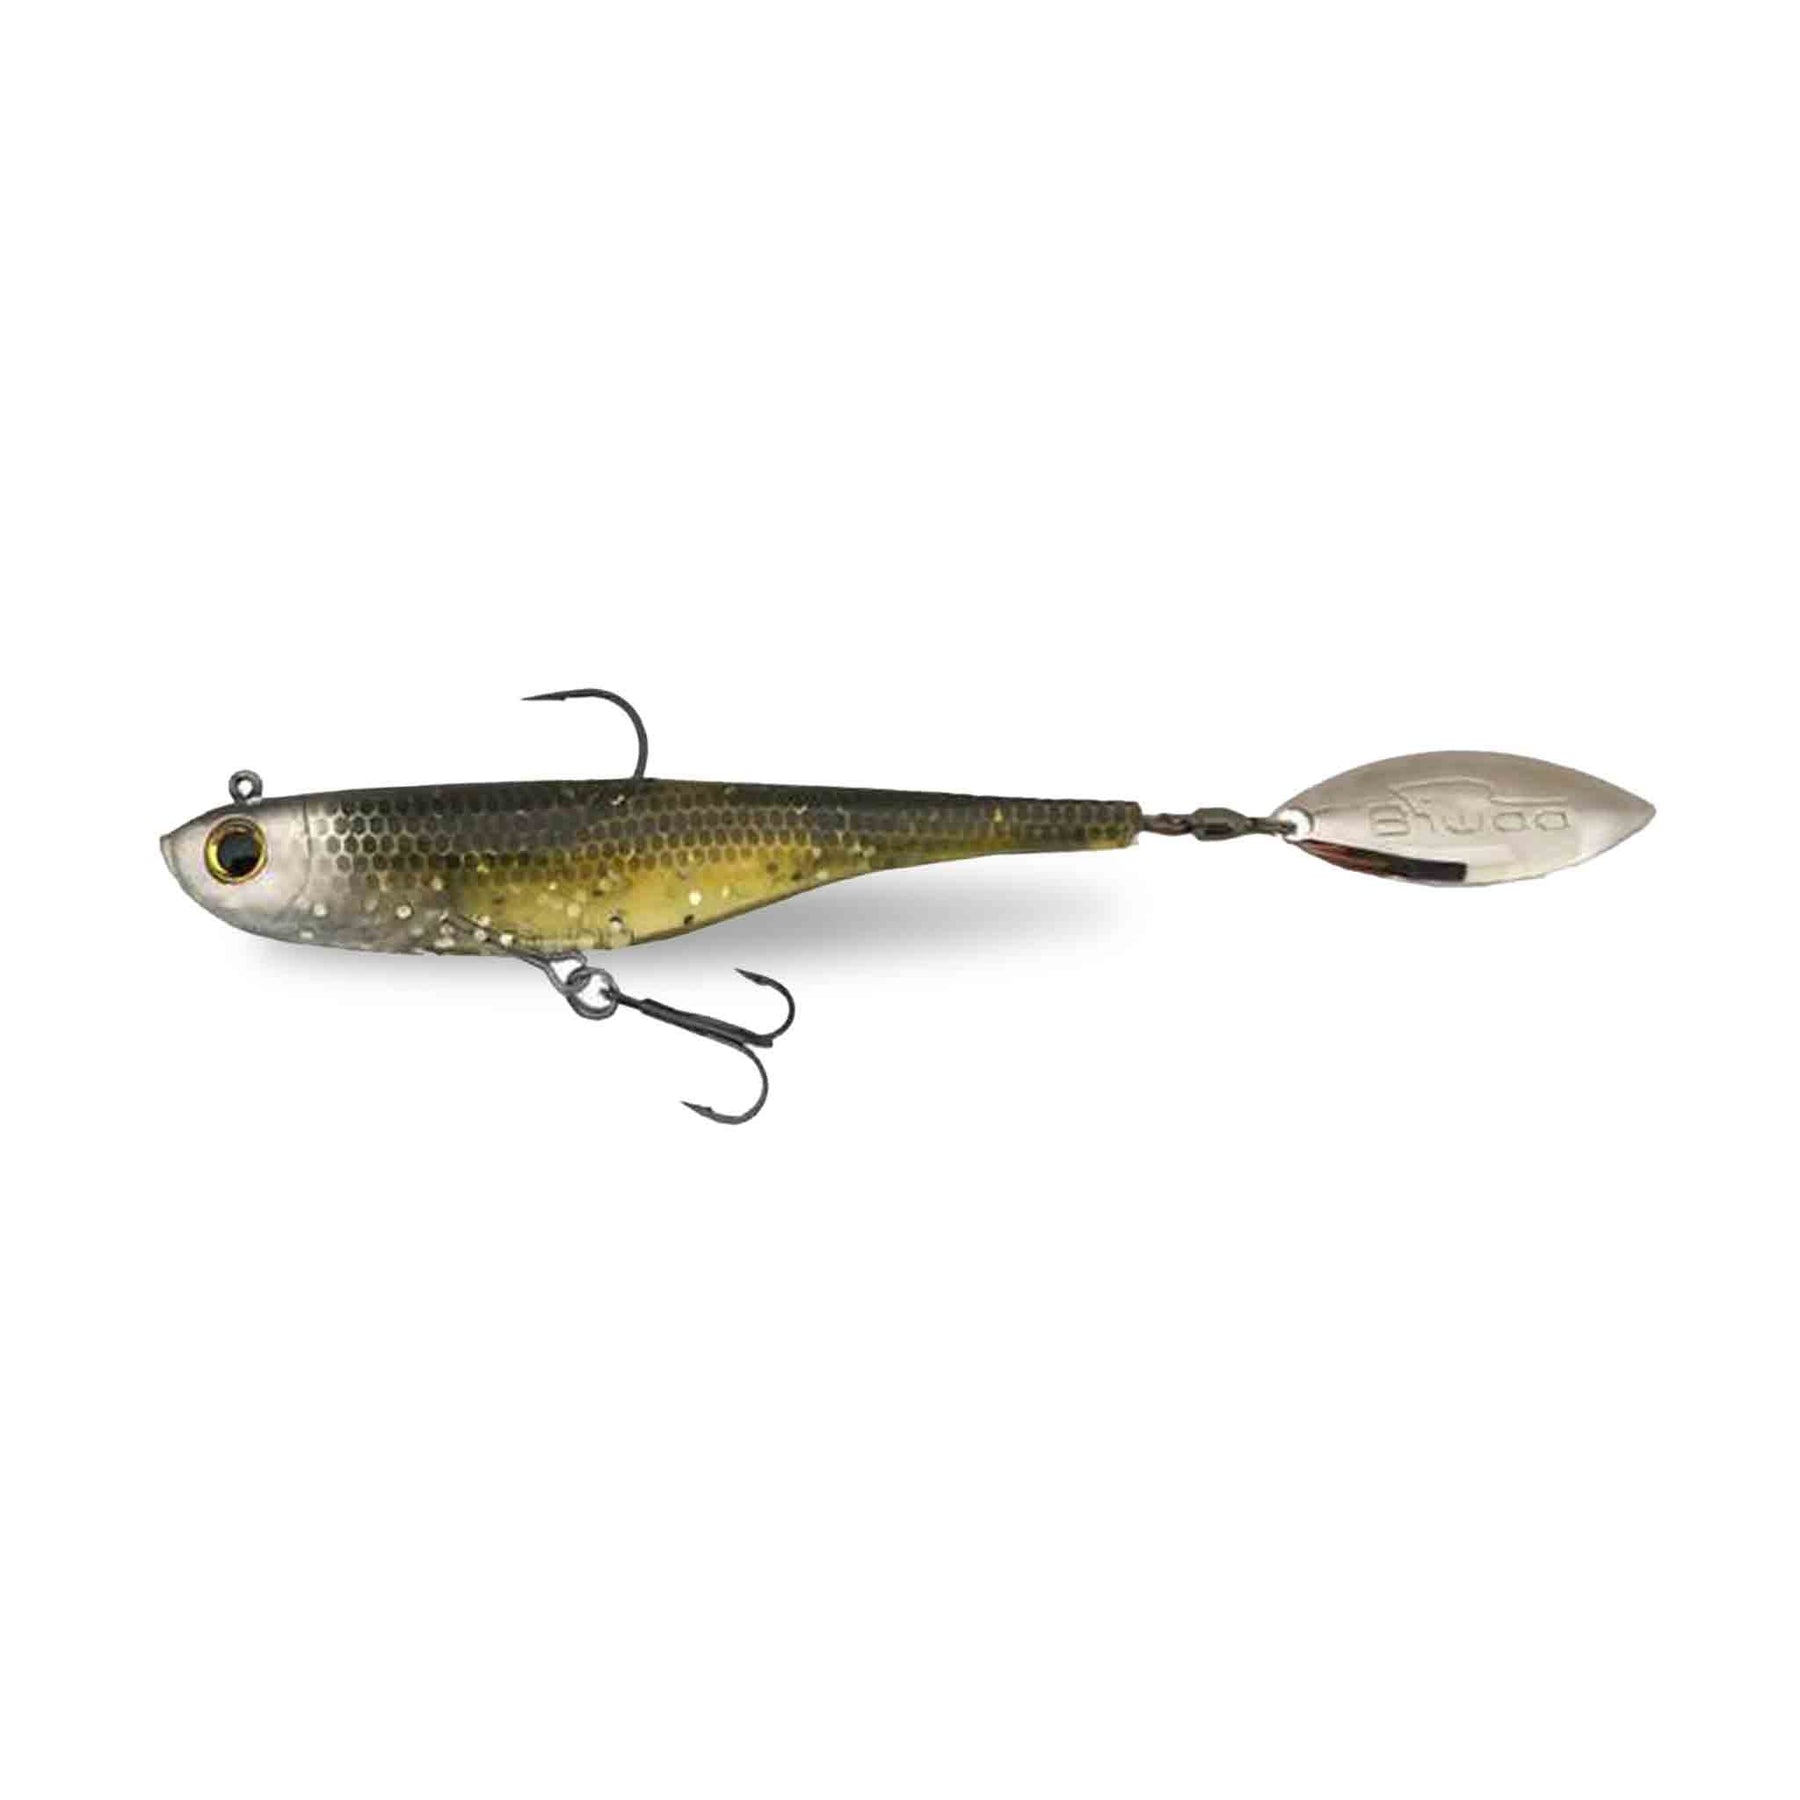 View of Swimbaits Biwaa Divinator Medium 35g Tailspin Swimbait Ghost Sliver Holo available at EZOKO Pike and Musky Shop